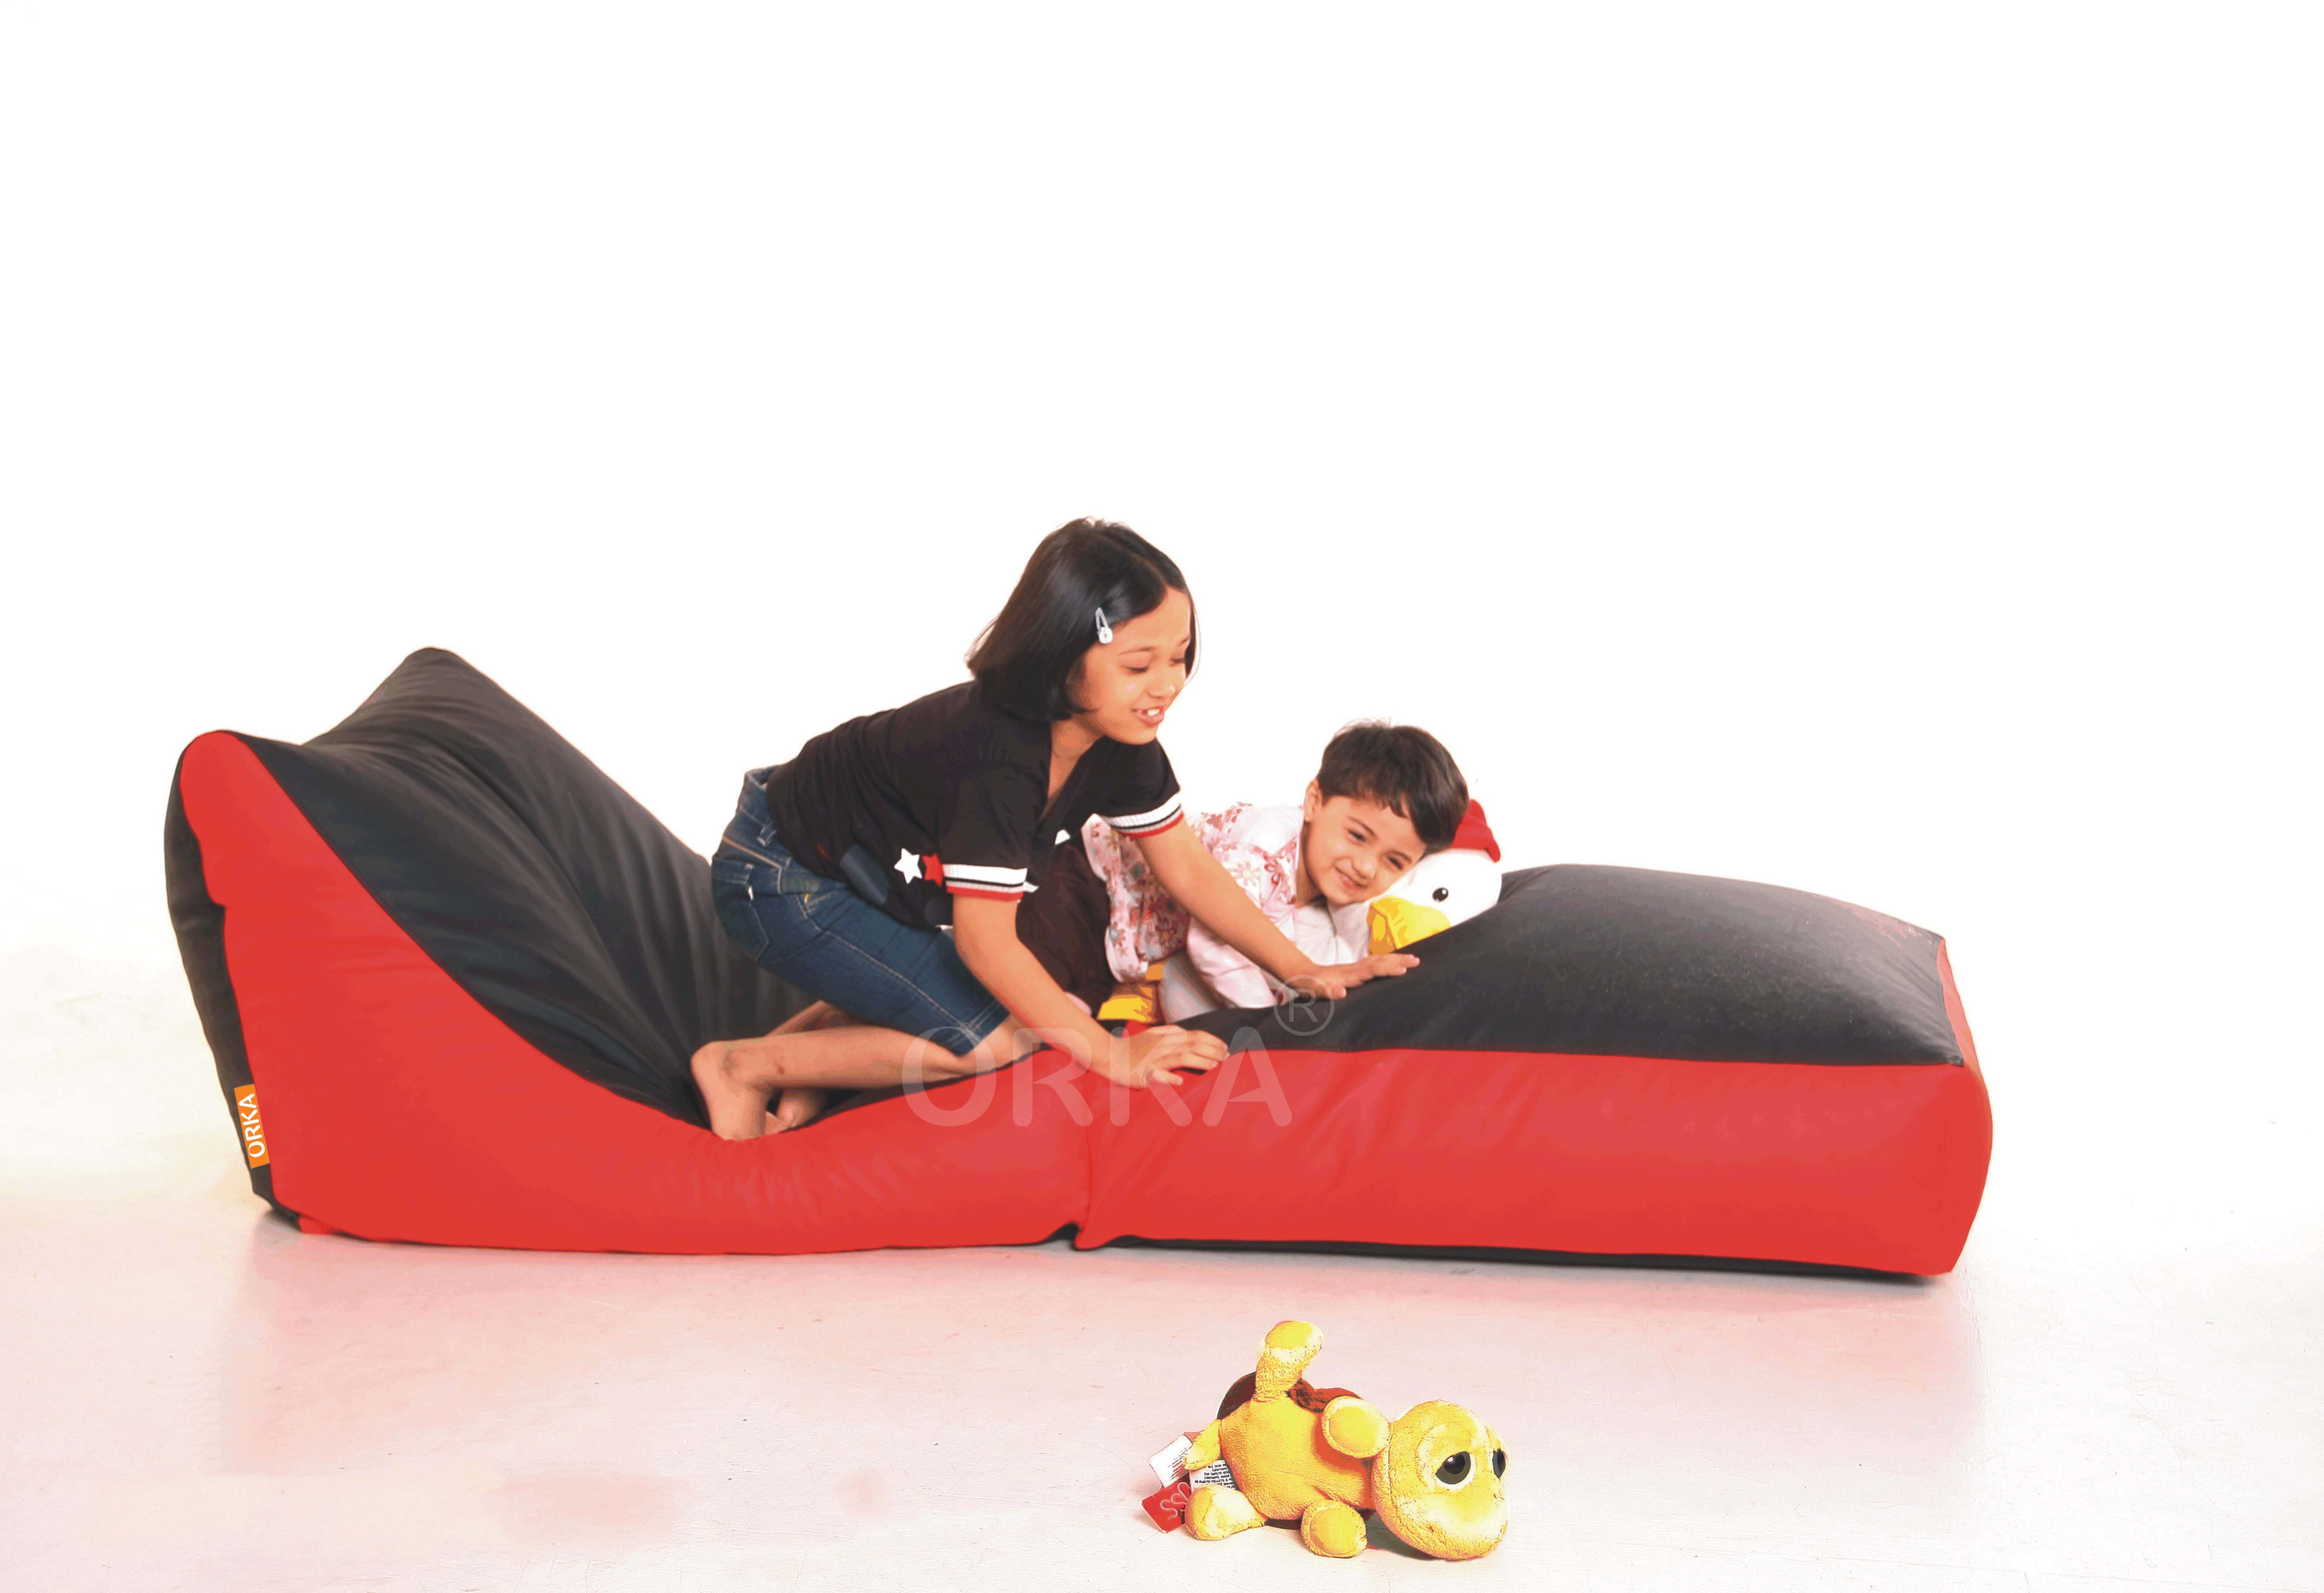  ORKA Art Leather Sofa Bed Convertible Filled With High Density Beans-Red And Black  